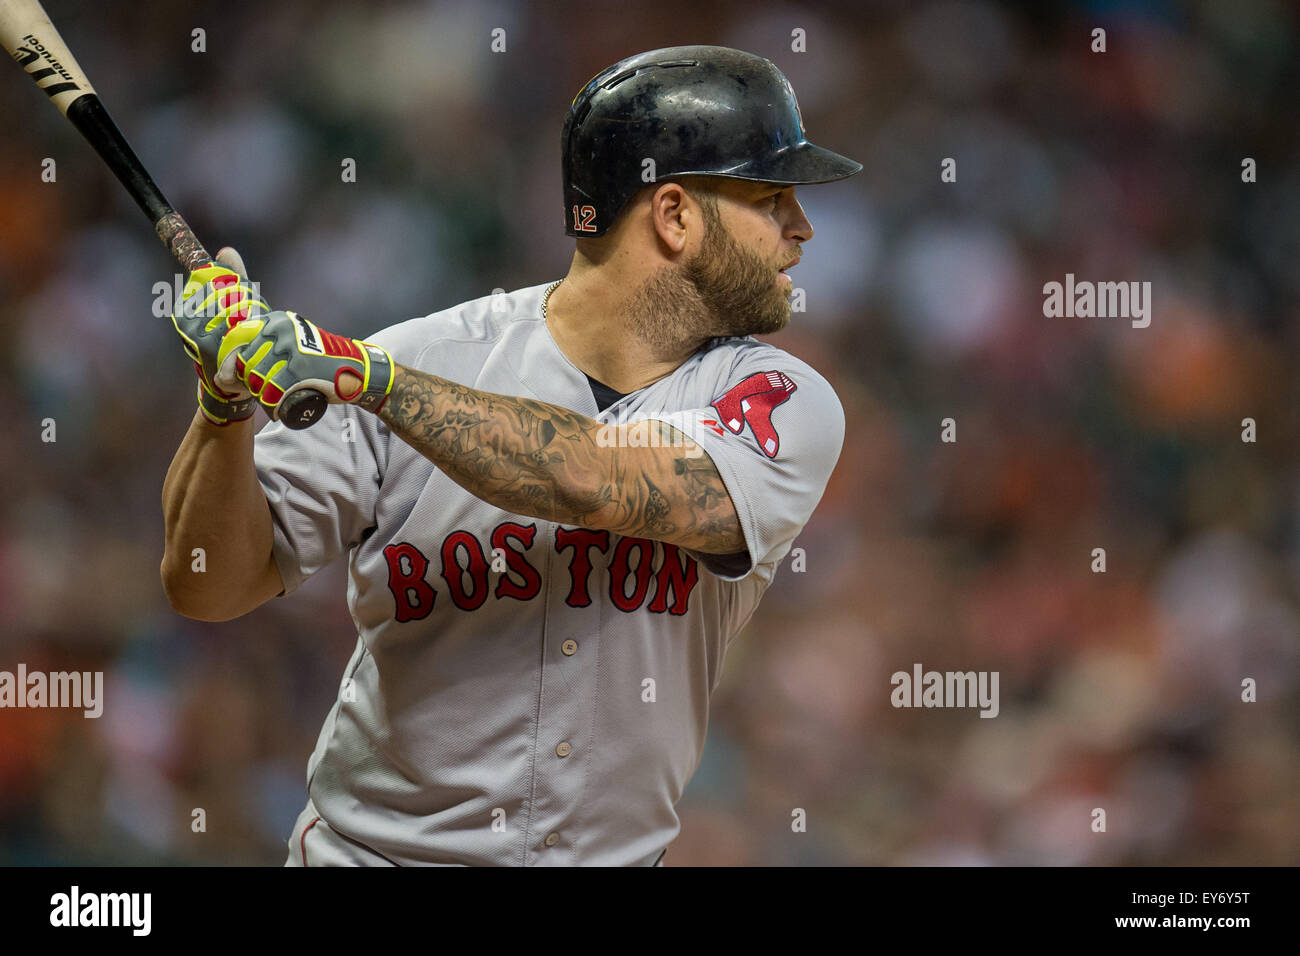 Houston, TX, USA. 22nd July, 2015. Boston Red Sox first baseman Mike Napoli (12) bats during the 5th inning of a Major League Baseball game between the Houston Astros and the Boston Red Sox at Minute Maid Park in Houston, TX. Trask Smith/CSM/Alamy Live News Stock Photo